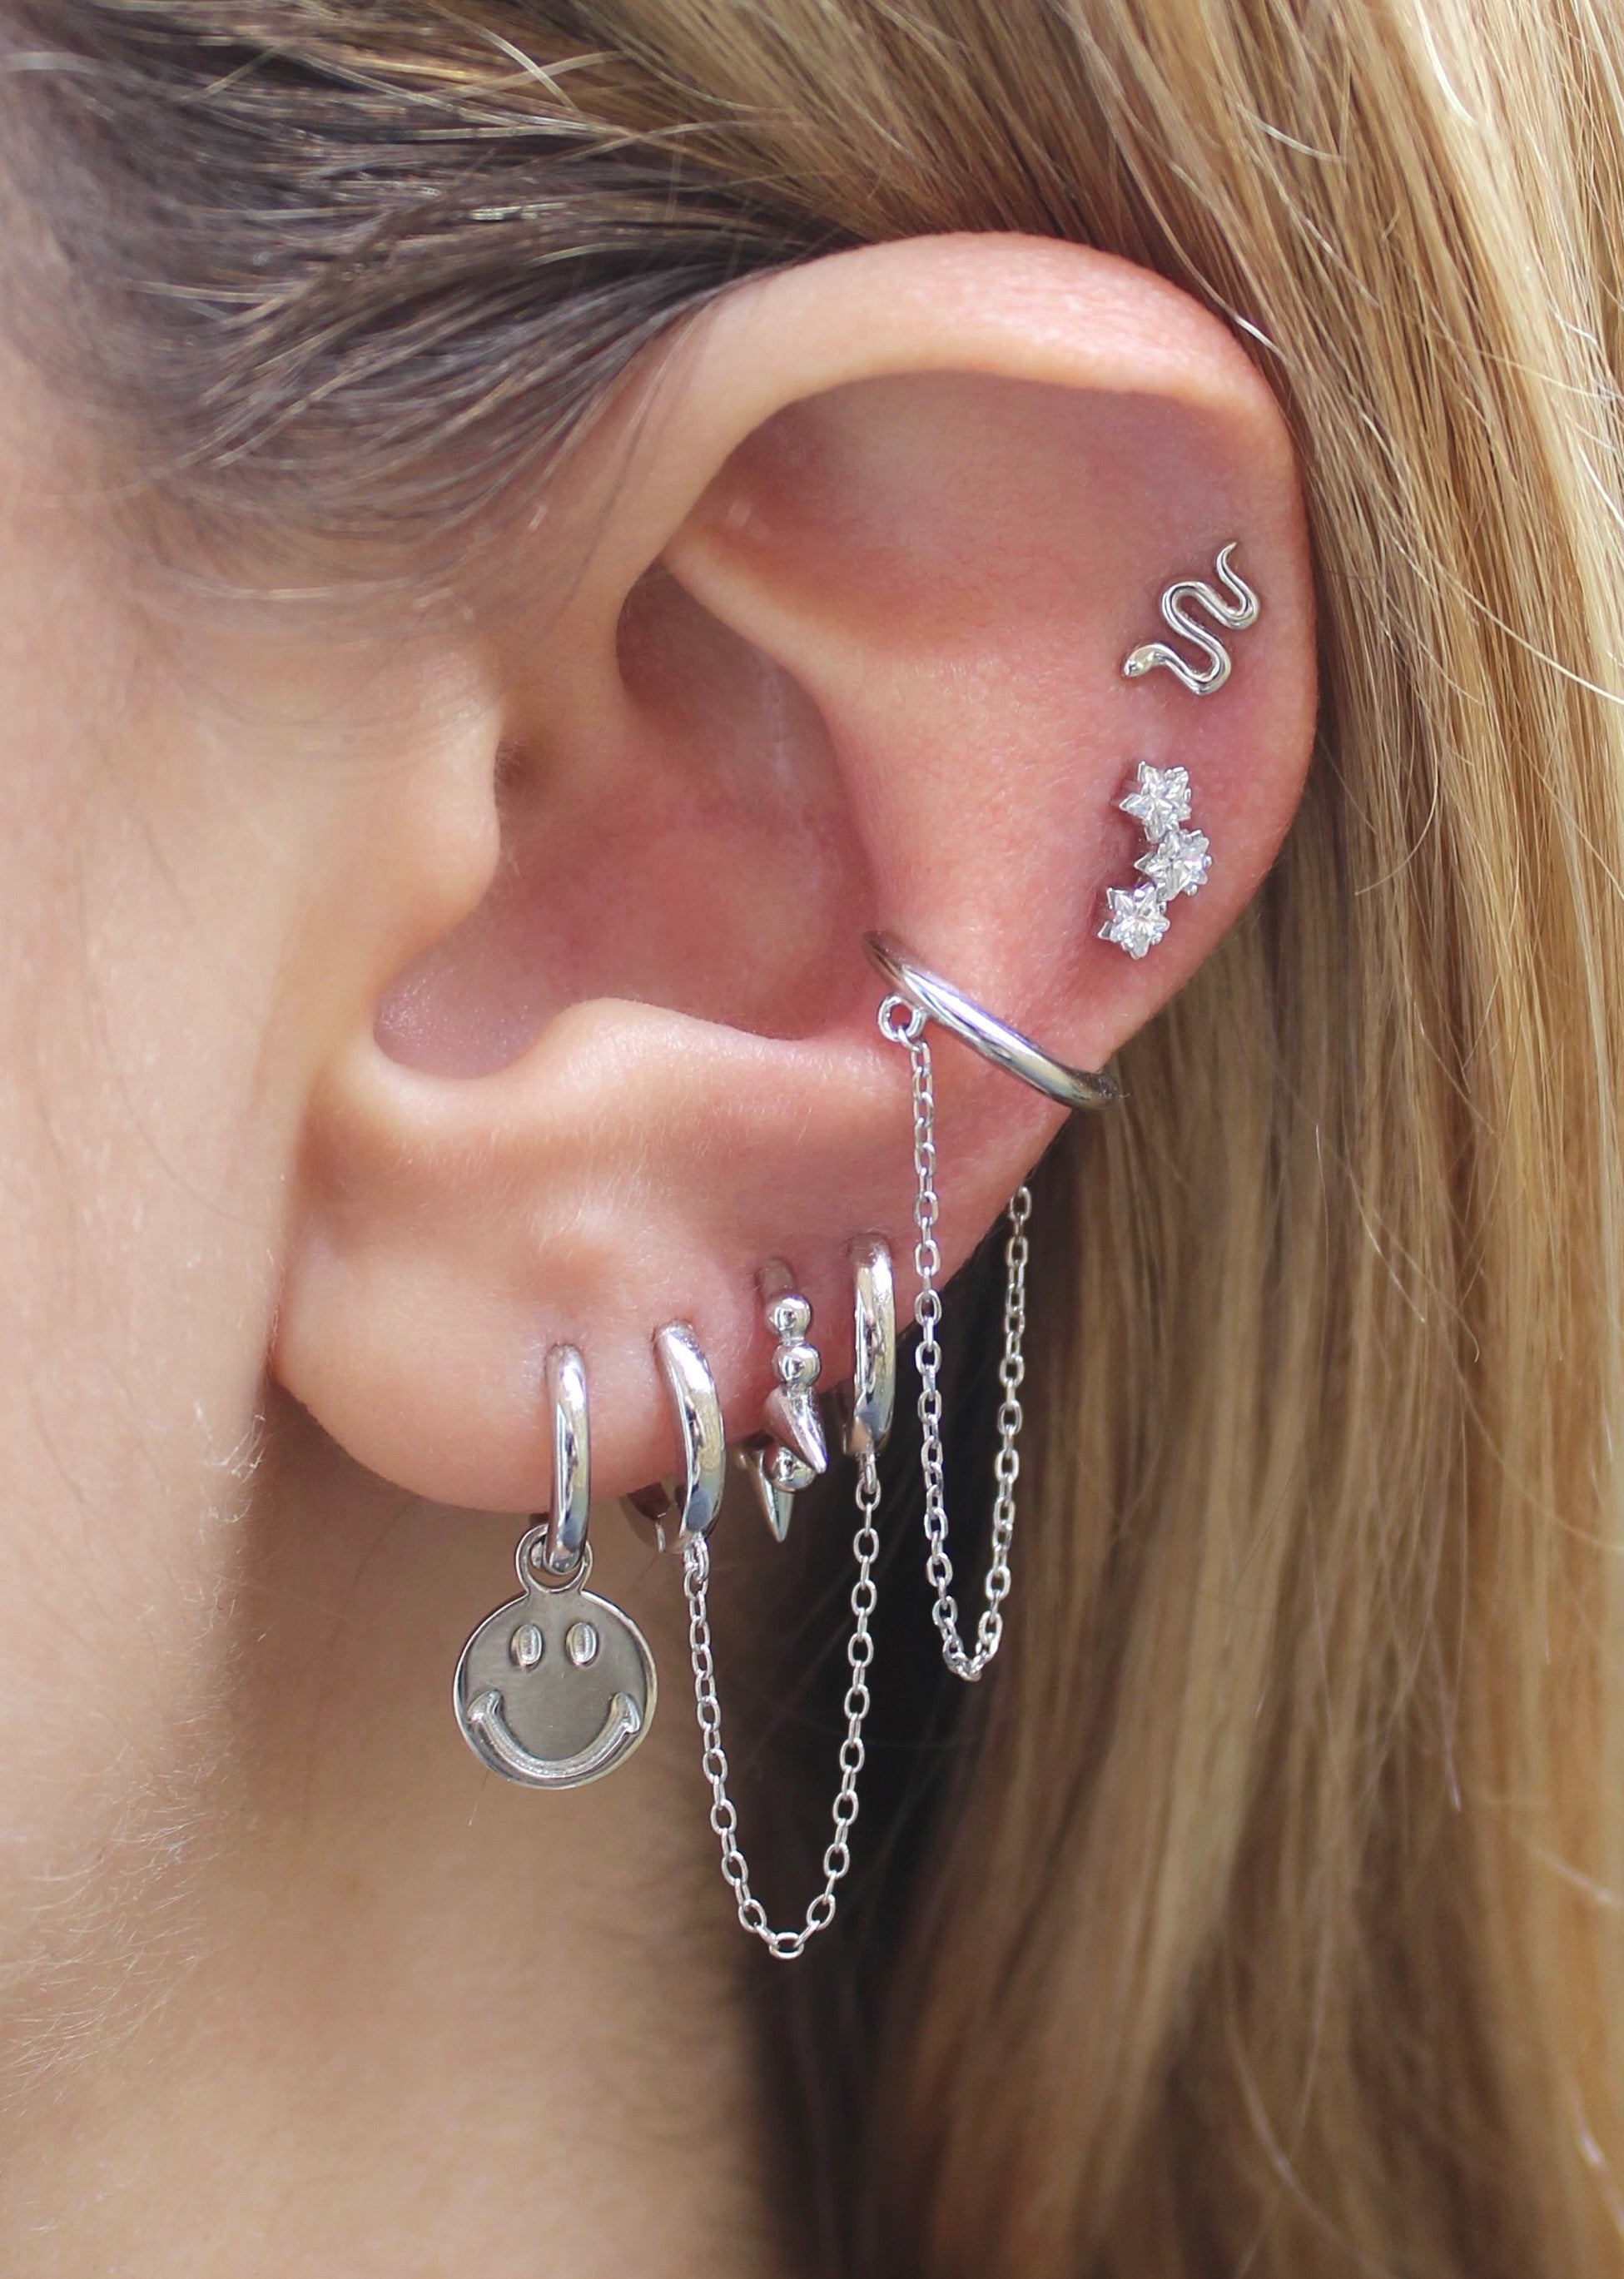 Chain Connected Silver Double Hoop Earring